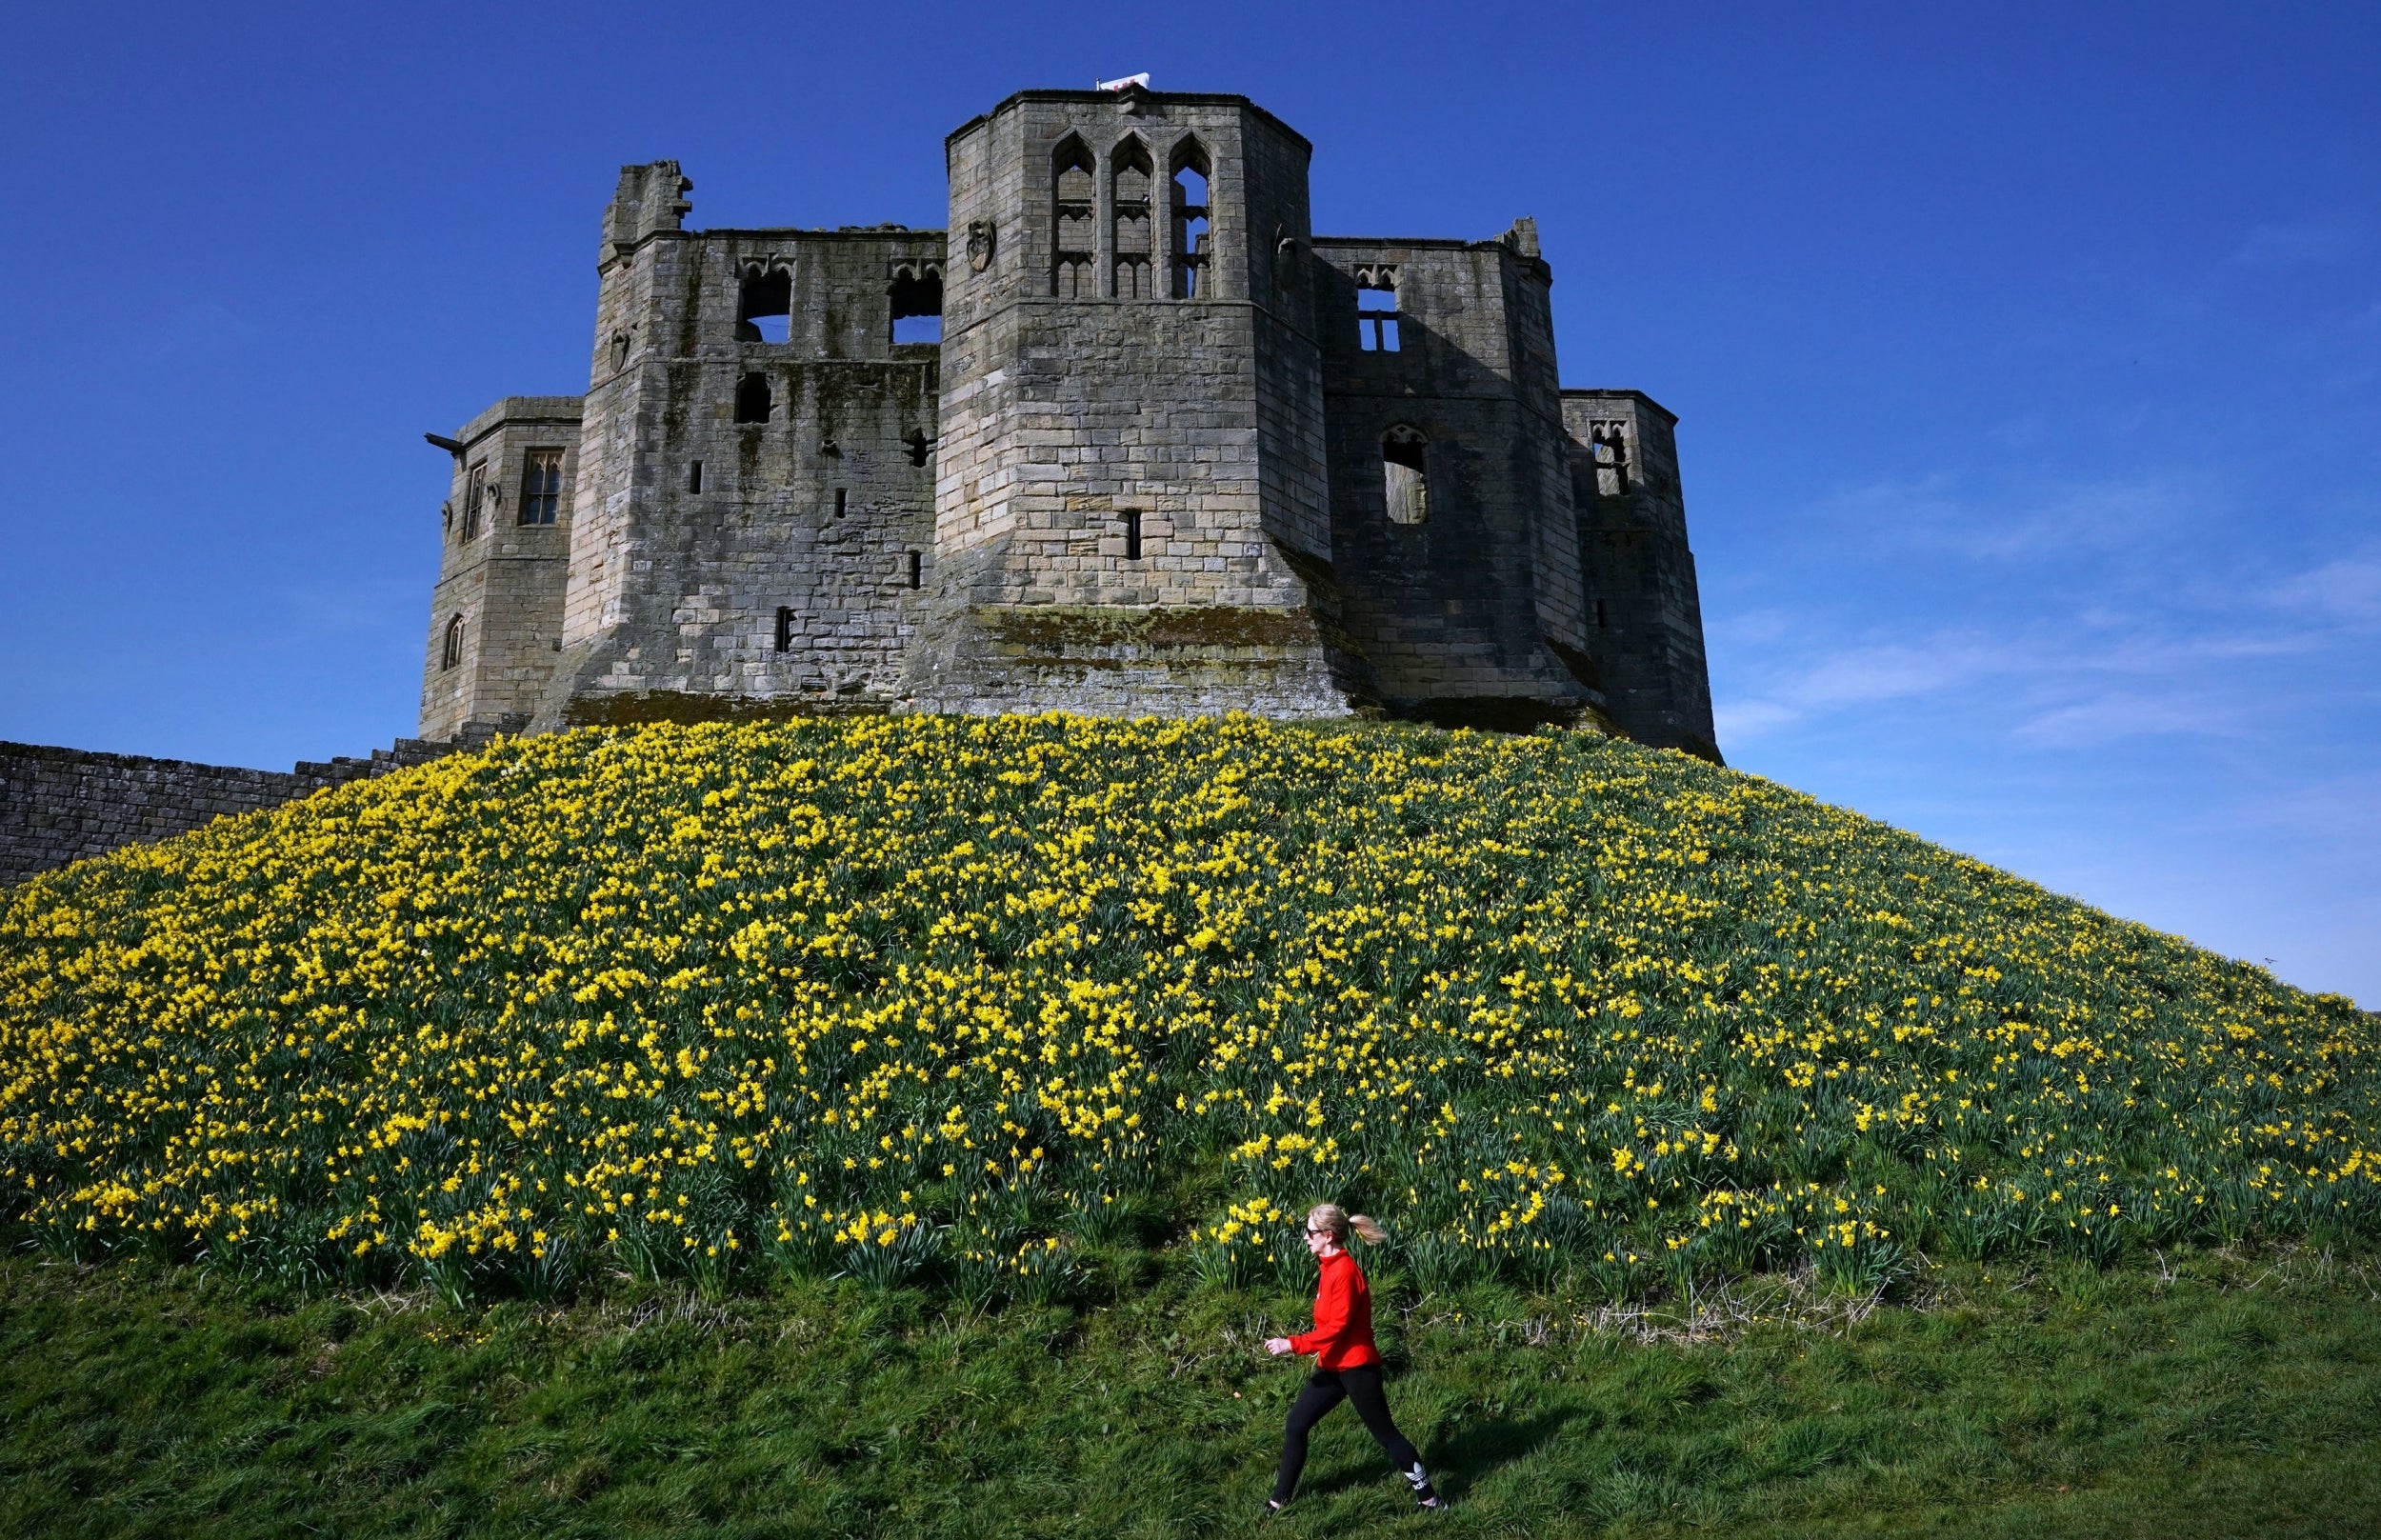 Fields of gold: daffodils bloom at Warkworth Castle, Northumberland